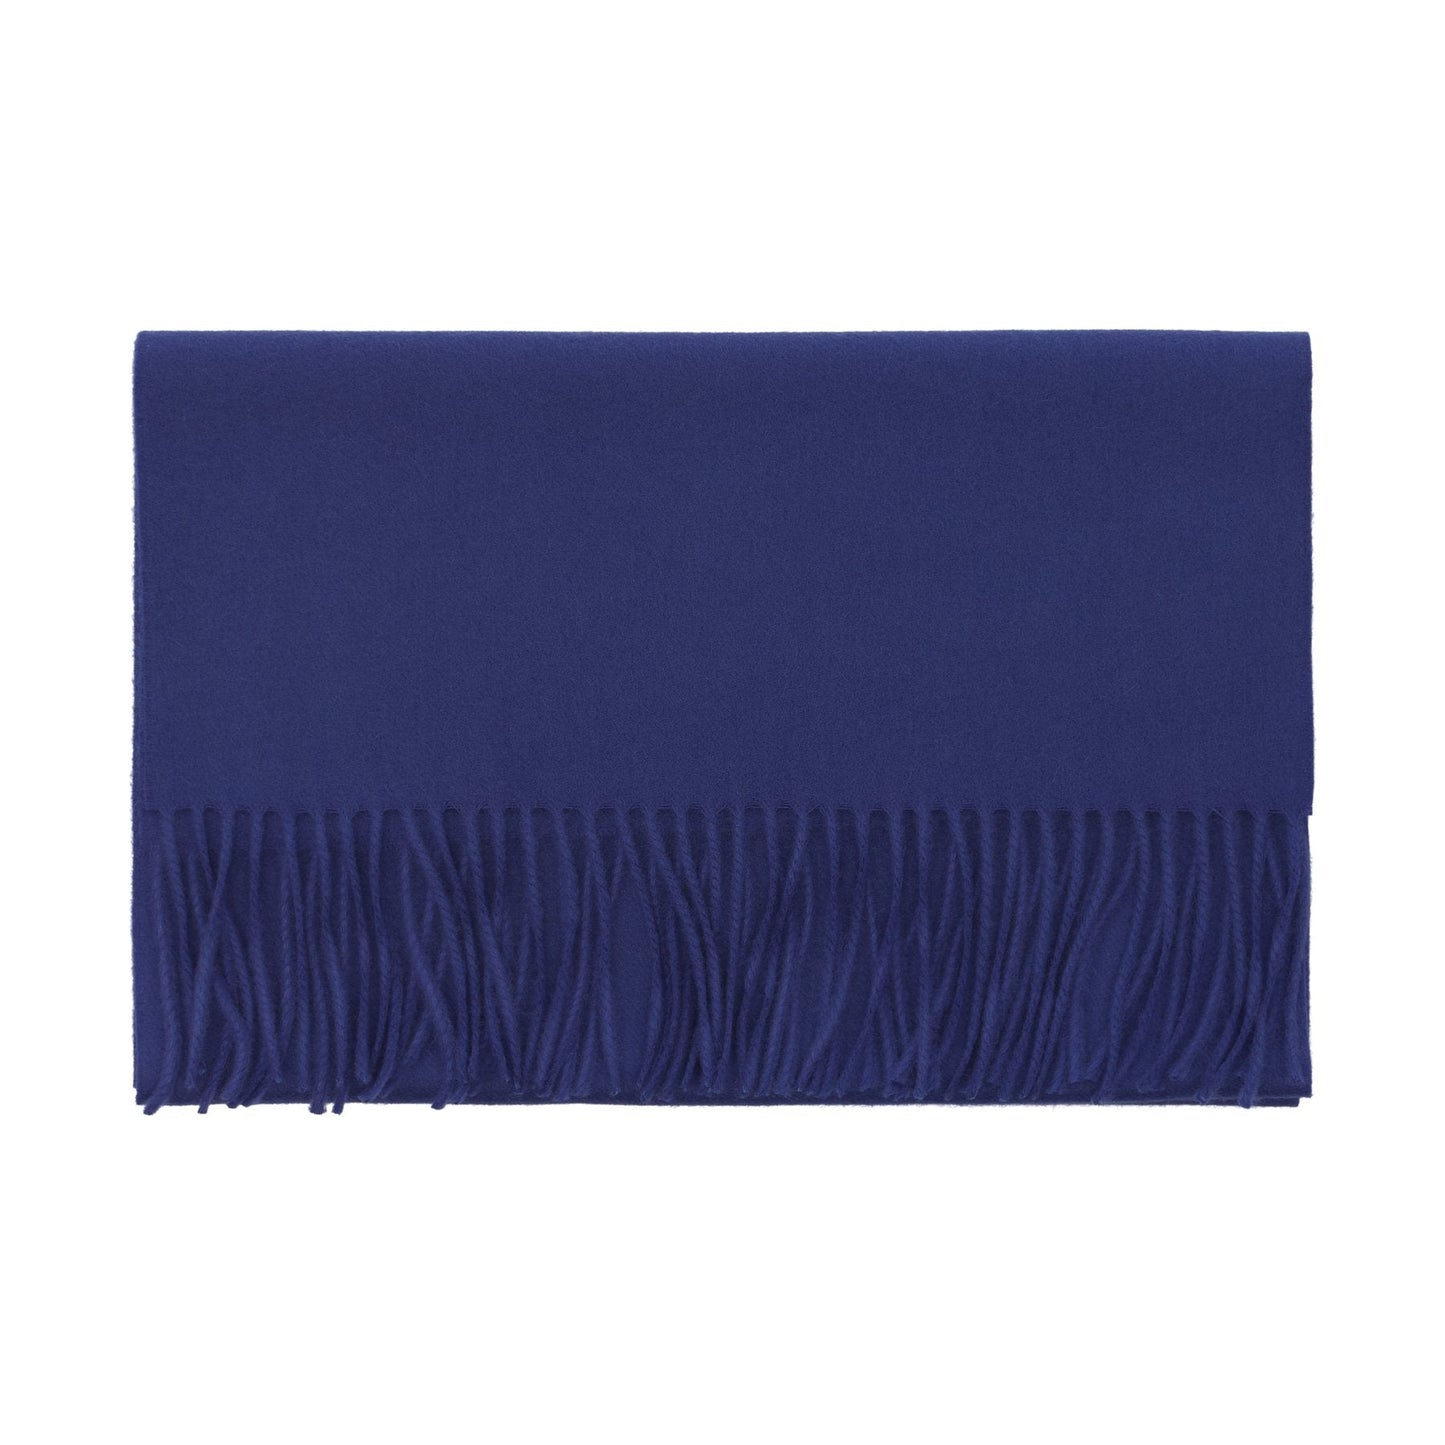 Piacenza Cashmere Fringed Cashmere Scarf in Royal Blue - SARTALE